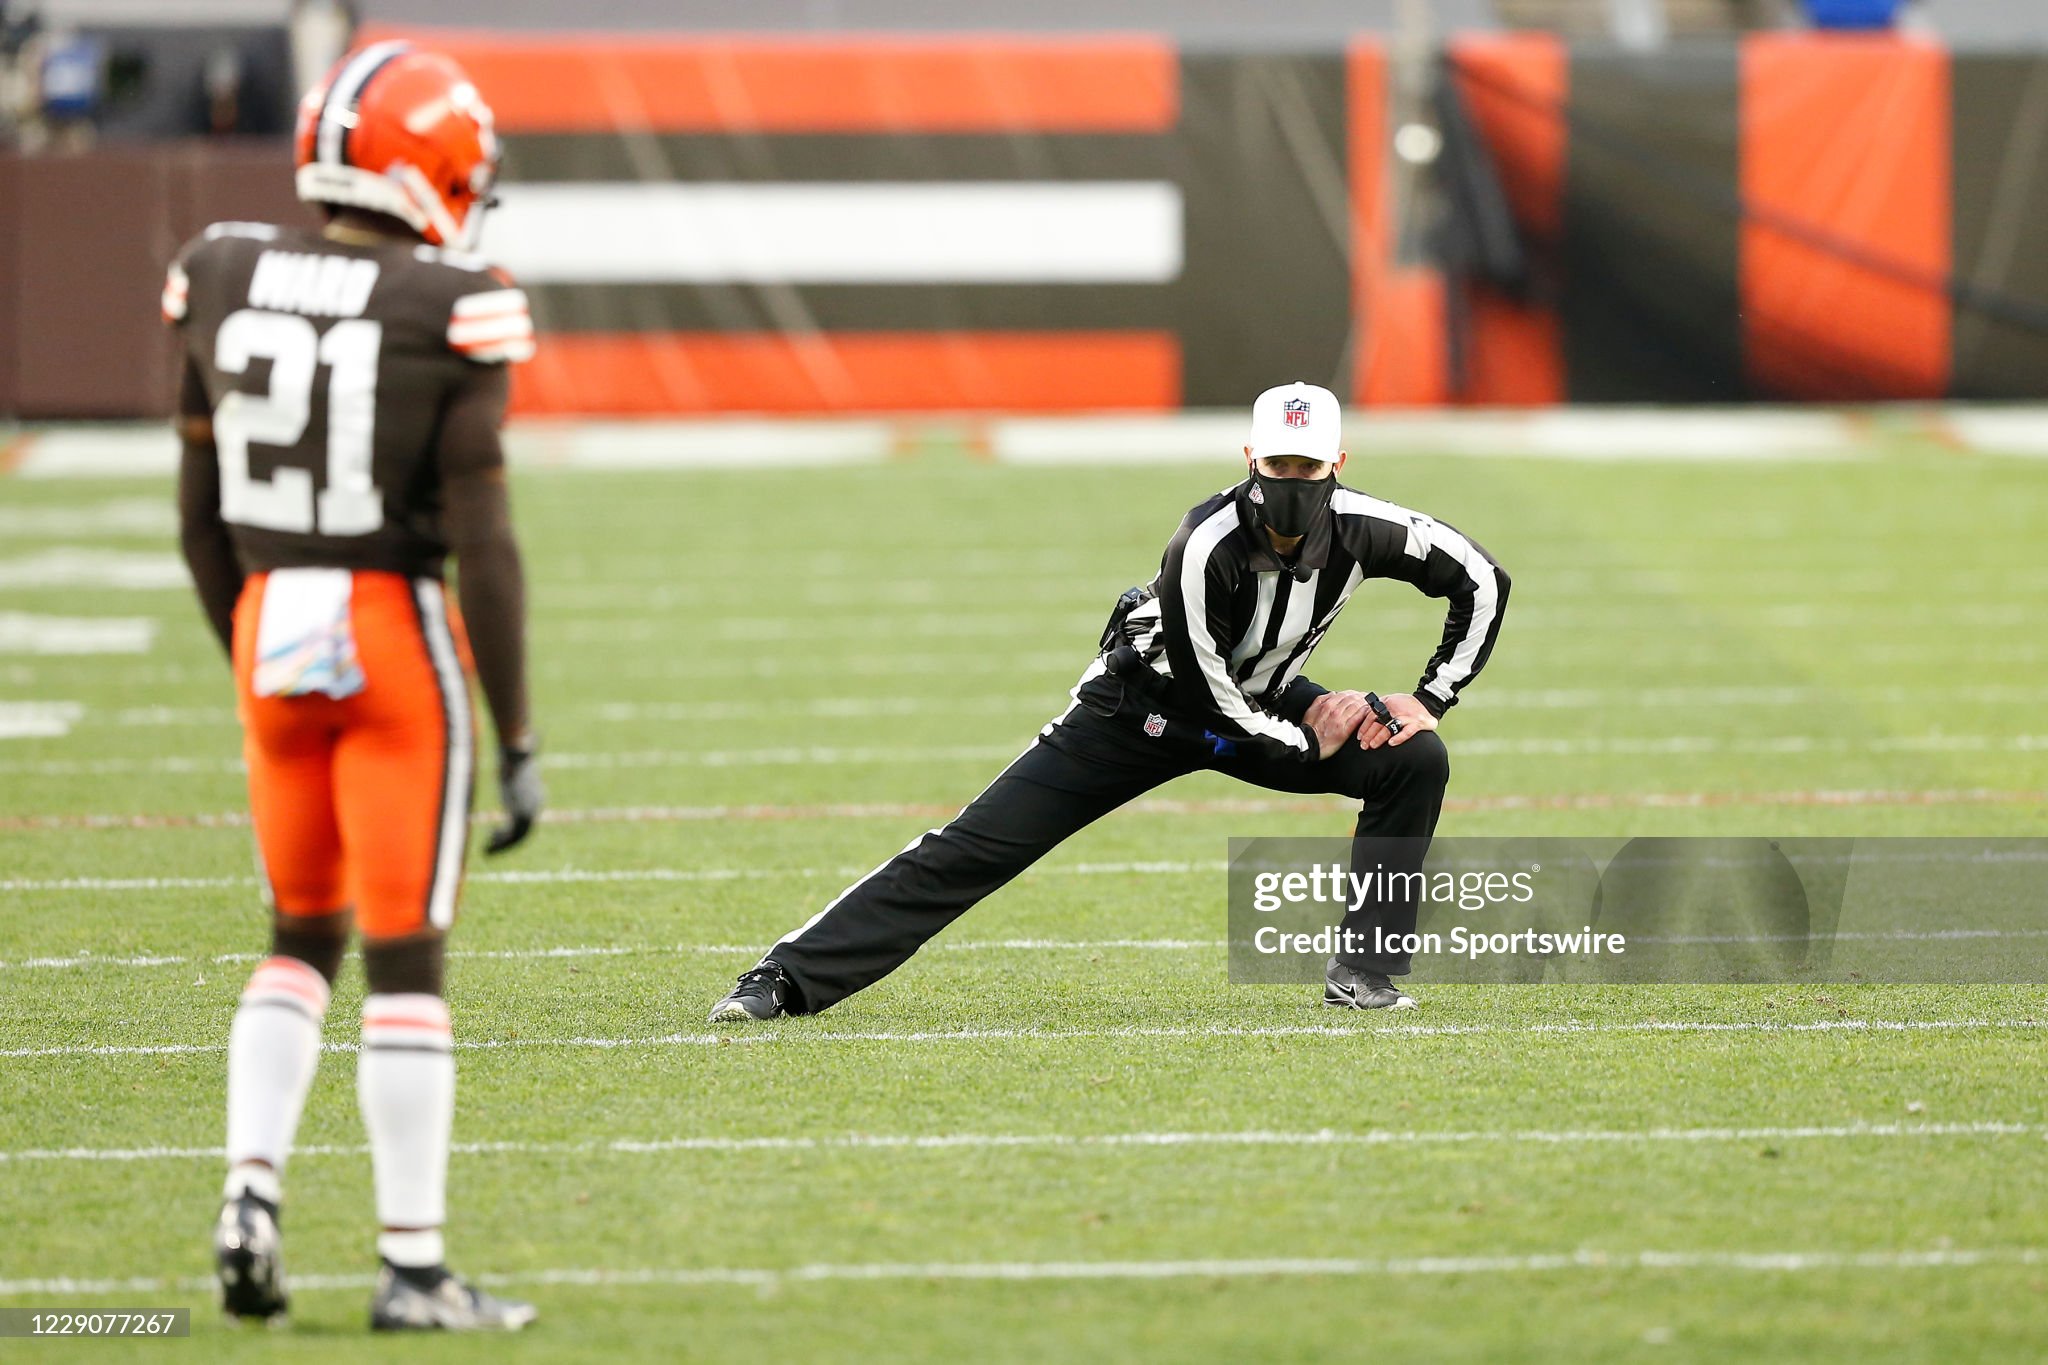 oct-11-colts-at-browns.jpg?s=2048x2048&w